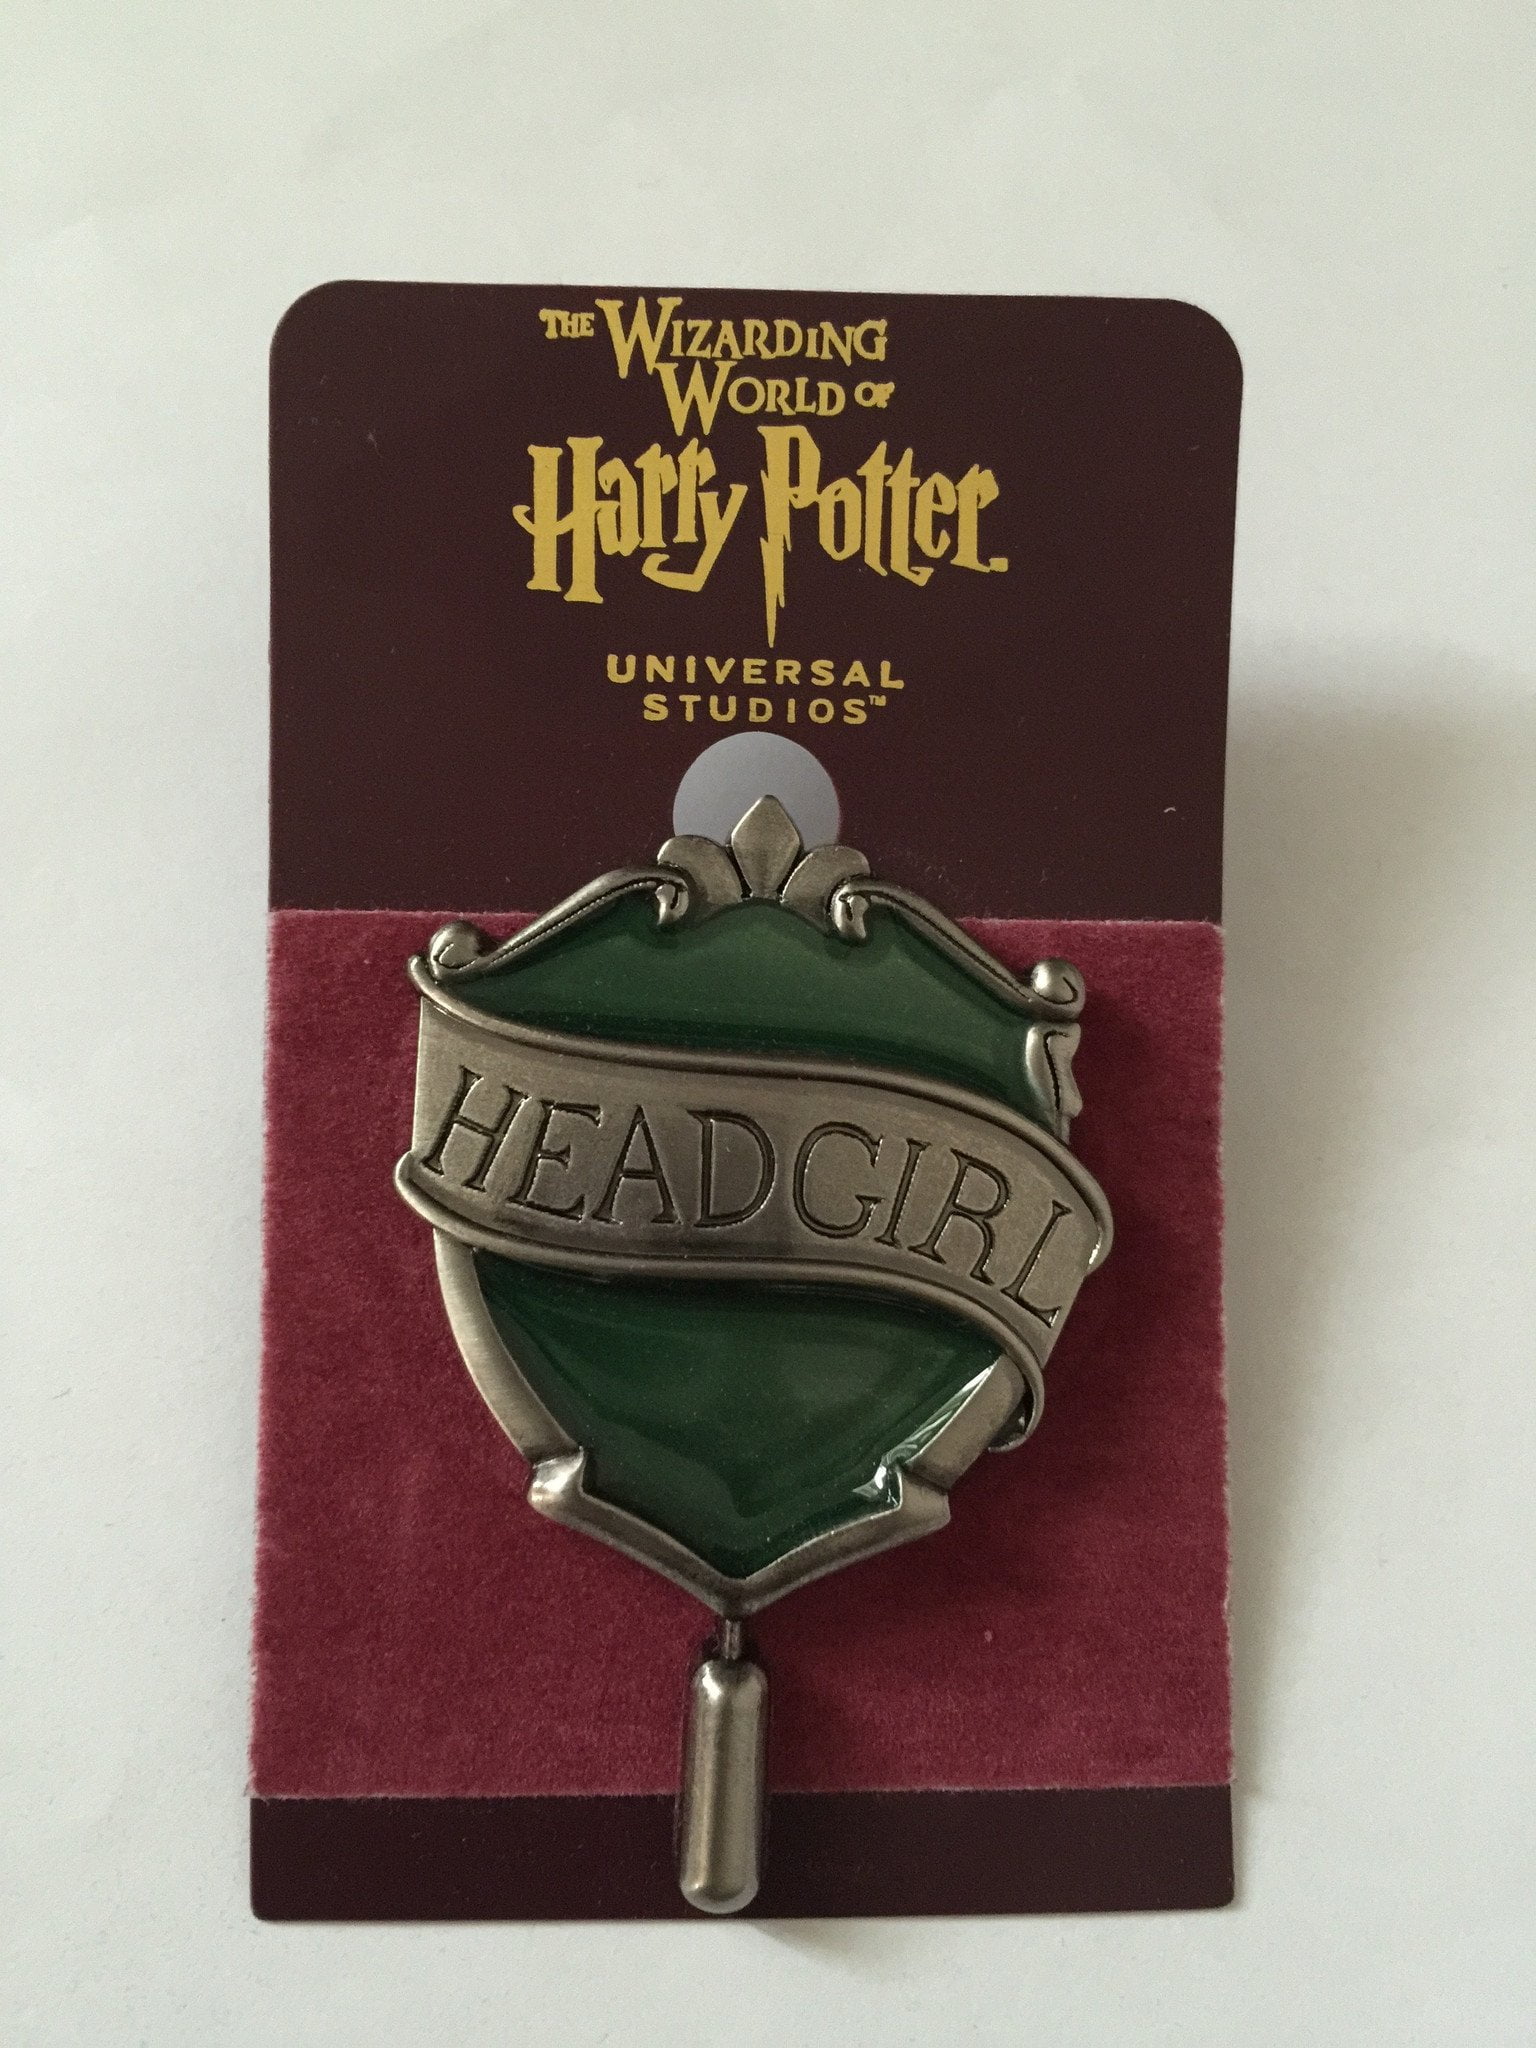 Universal Studios Wizarding World of Harry Potter Quidditch Slytherin Pin New 